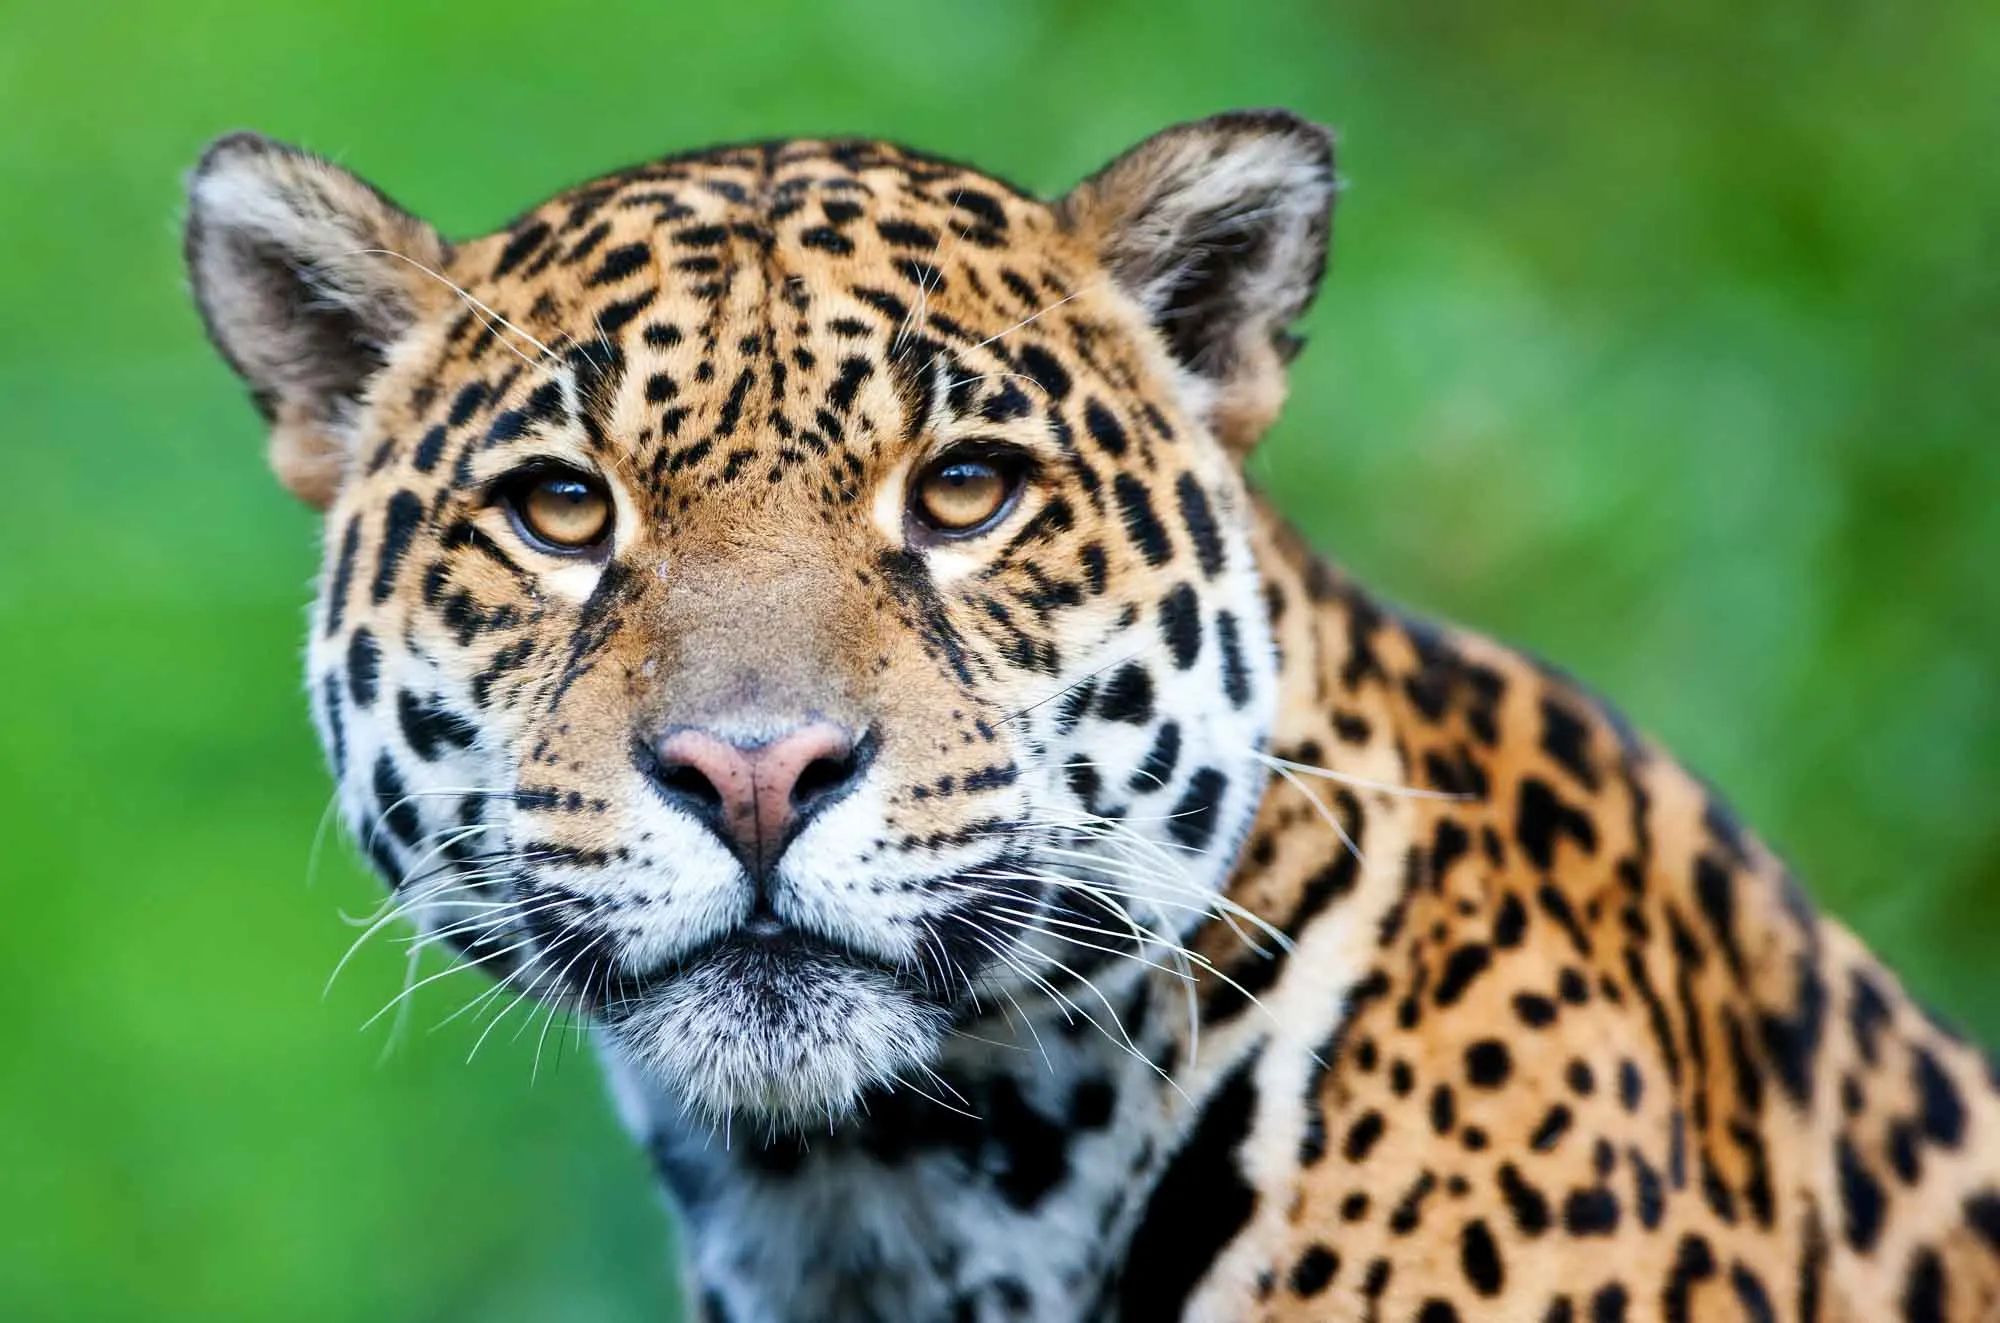 Jaguar (Panthera Onca) - Lifestyle, Diet, and More - Wildlife Explained